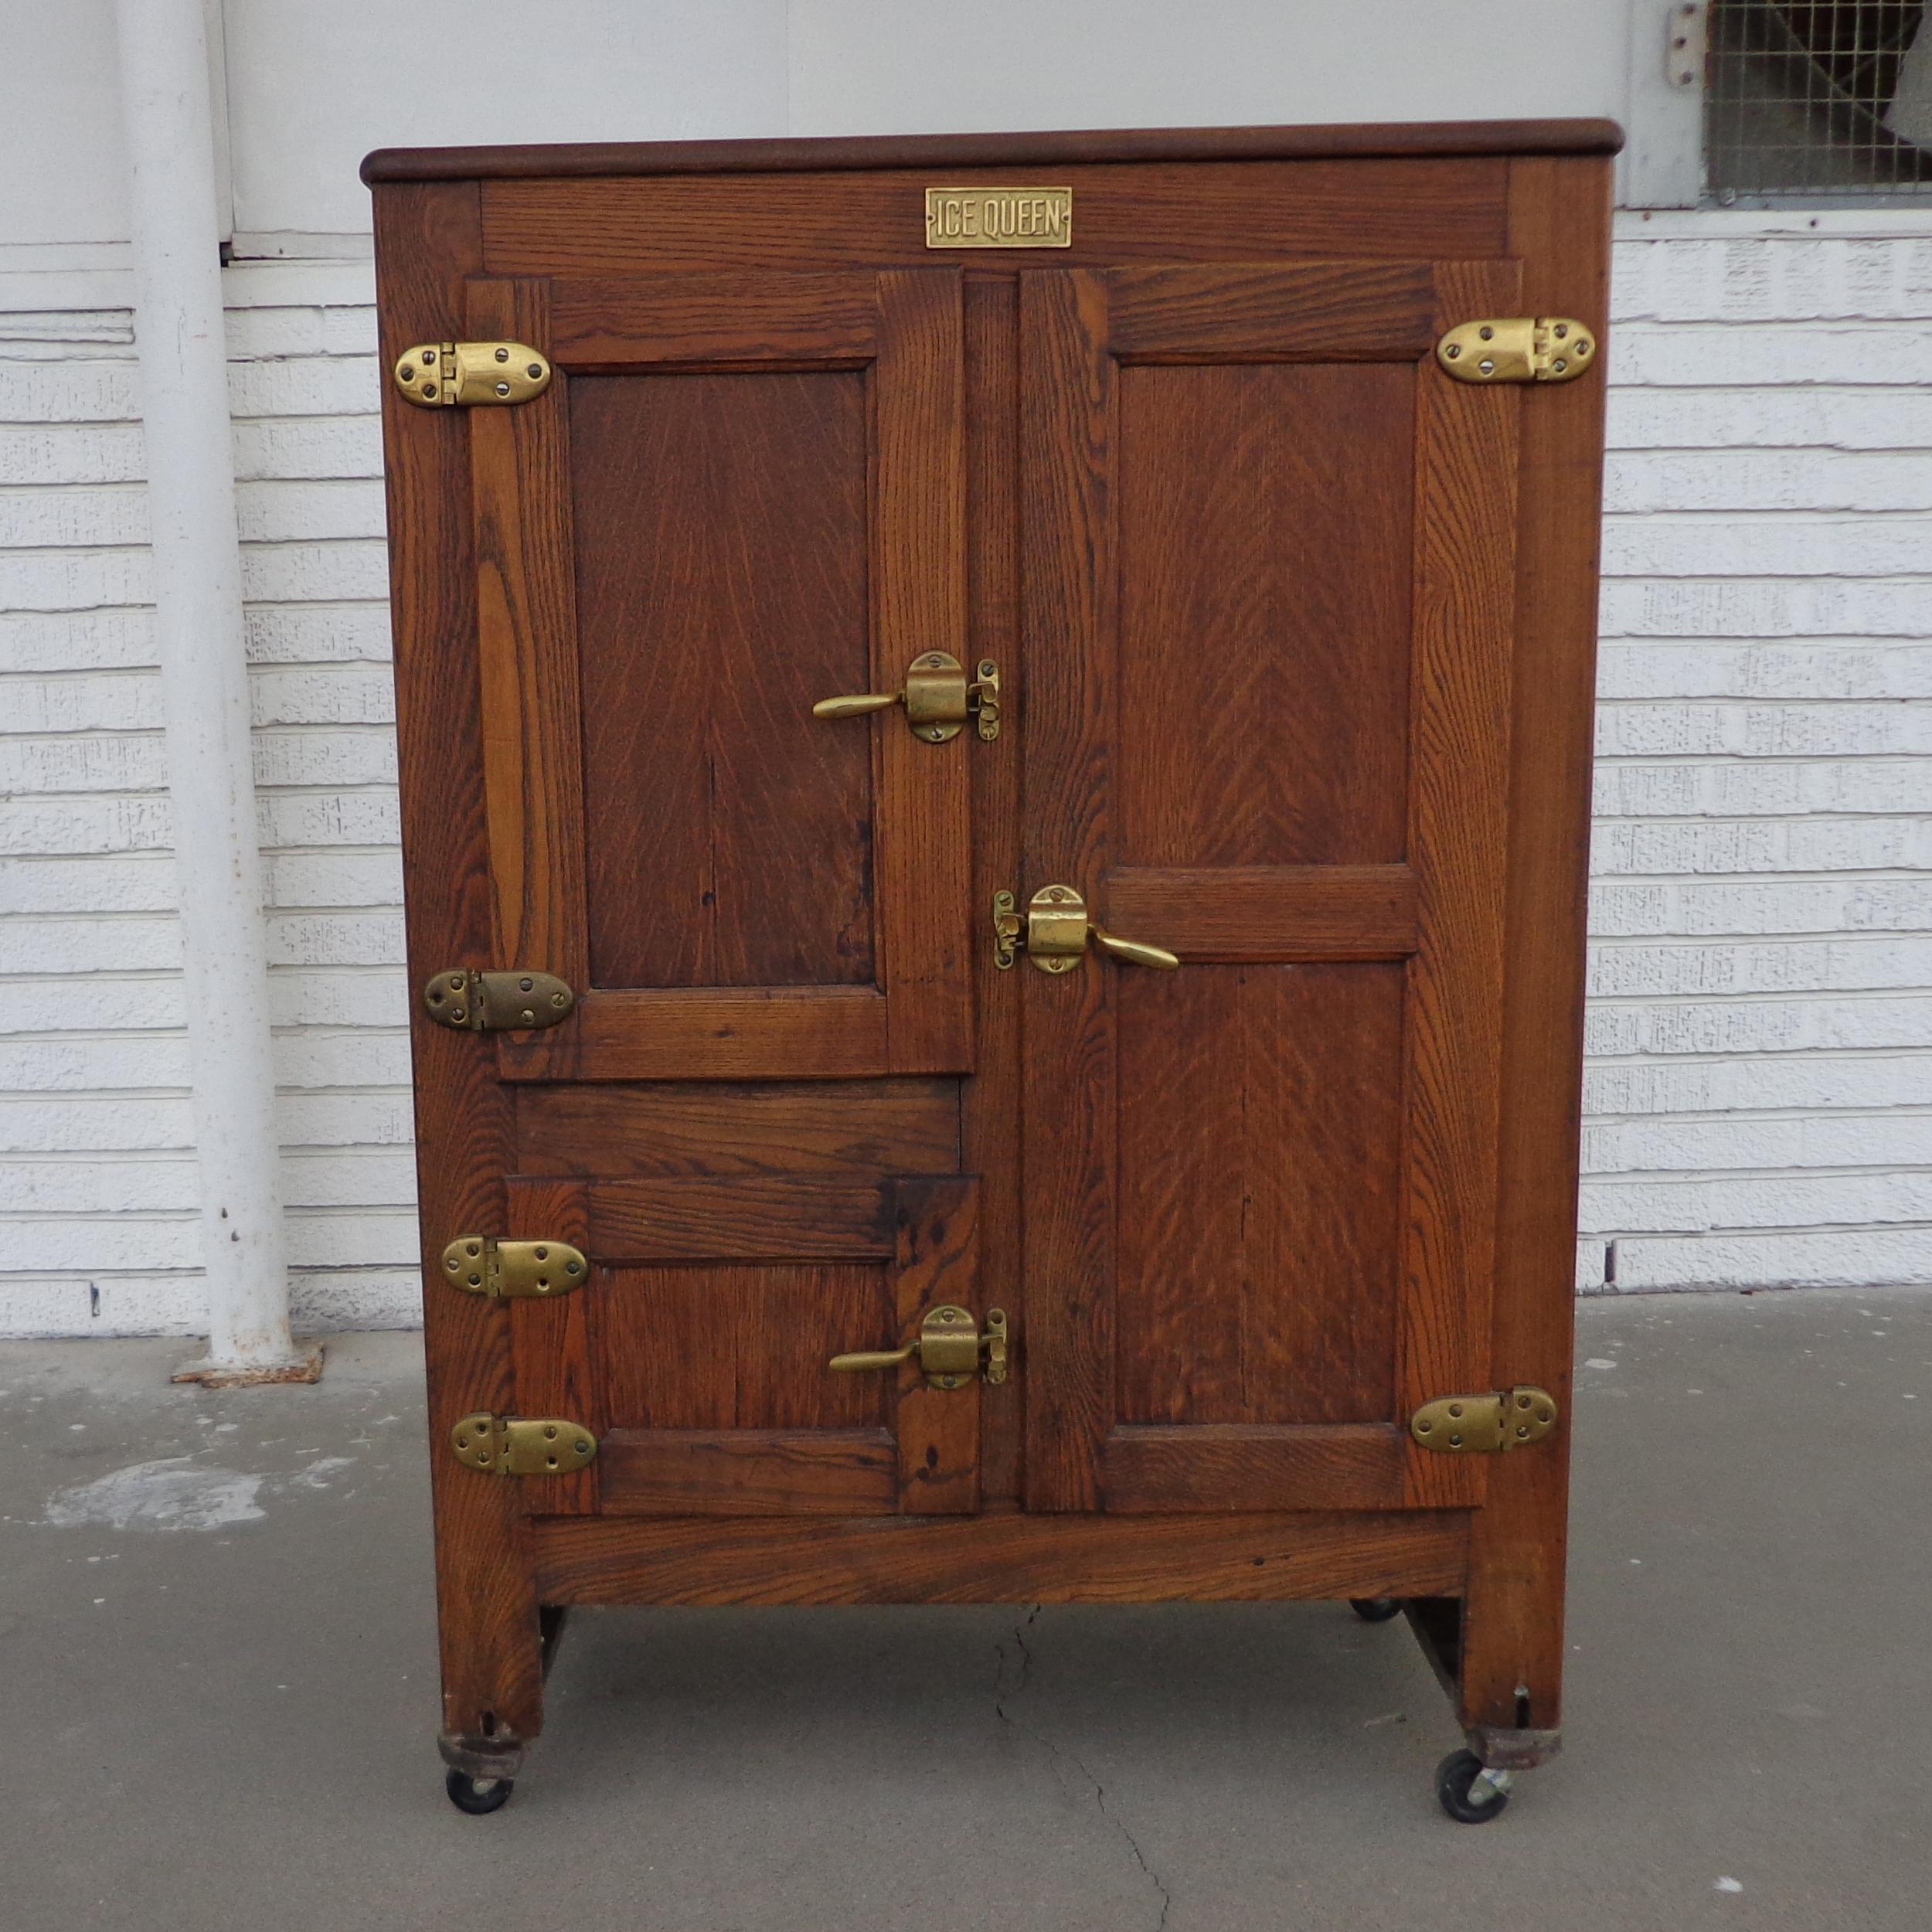 Antique Oak Ice Box Wine Cabinet by Ice Queen 2